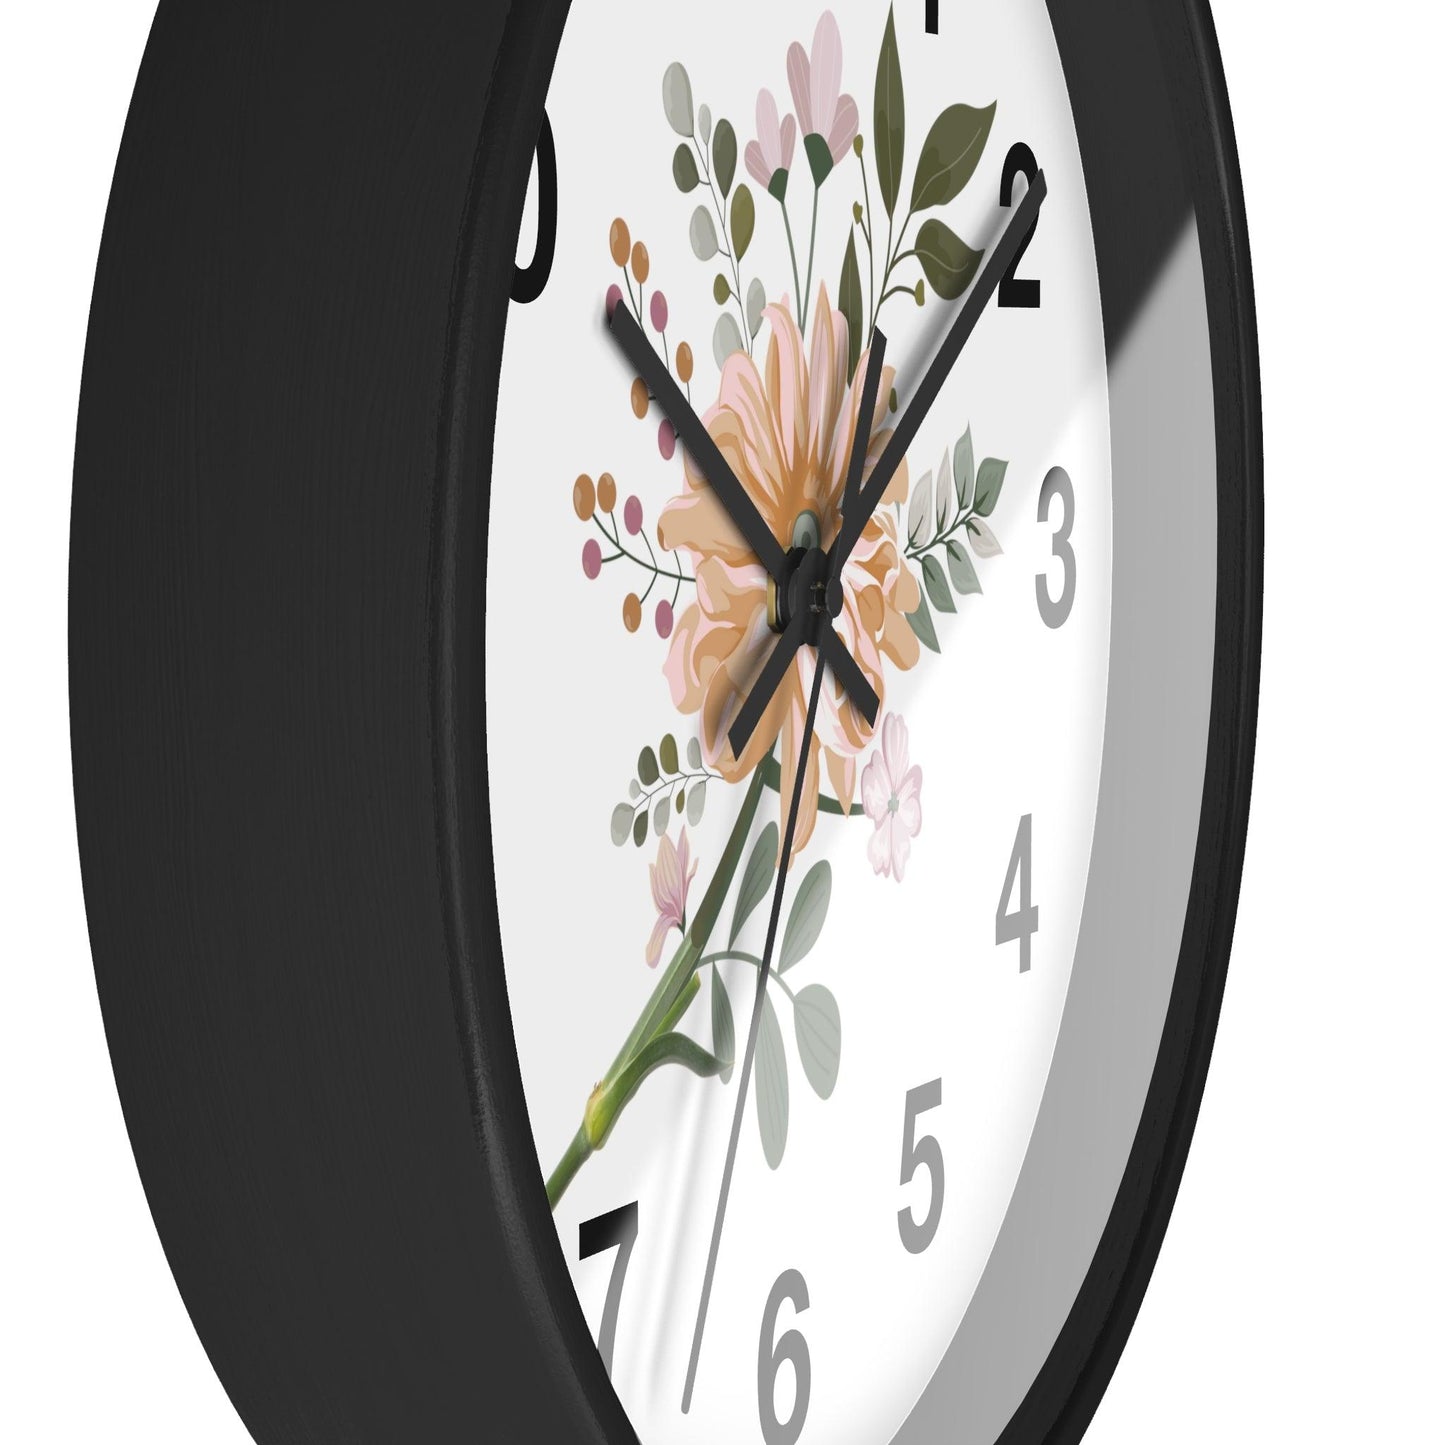 Flower Wall Clock Floral Wall Clock Home Decor Gift House Warming Gift - Mom Gift Unique Gift Farmhouse Clocks For Wall Living Room Bedroom